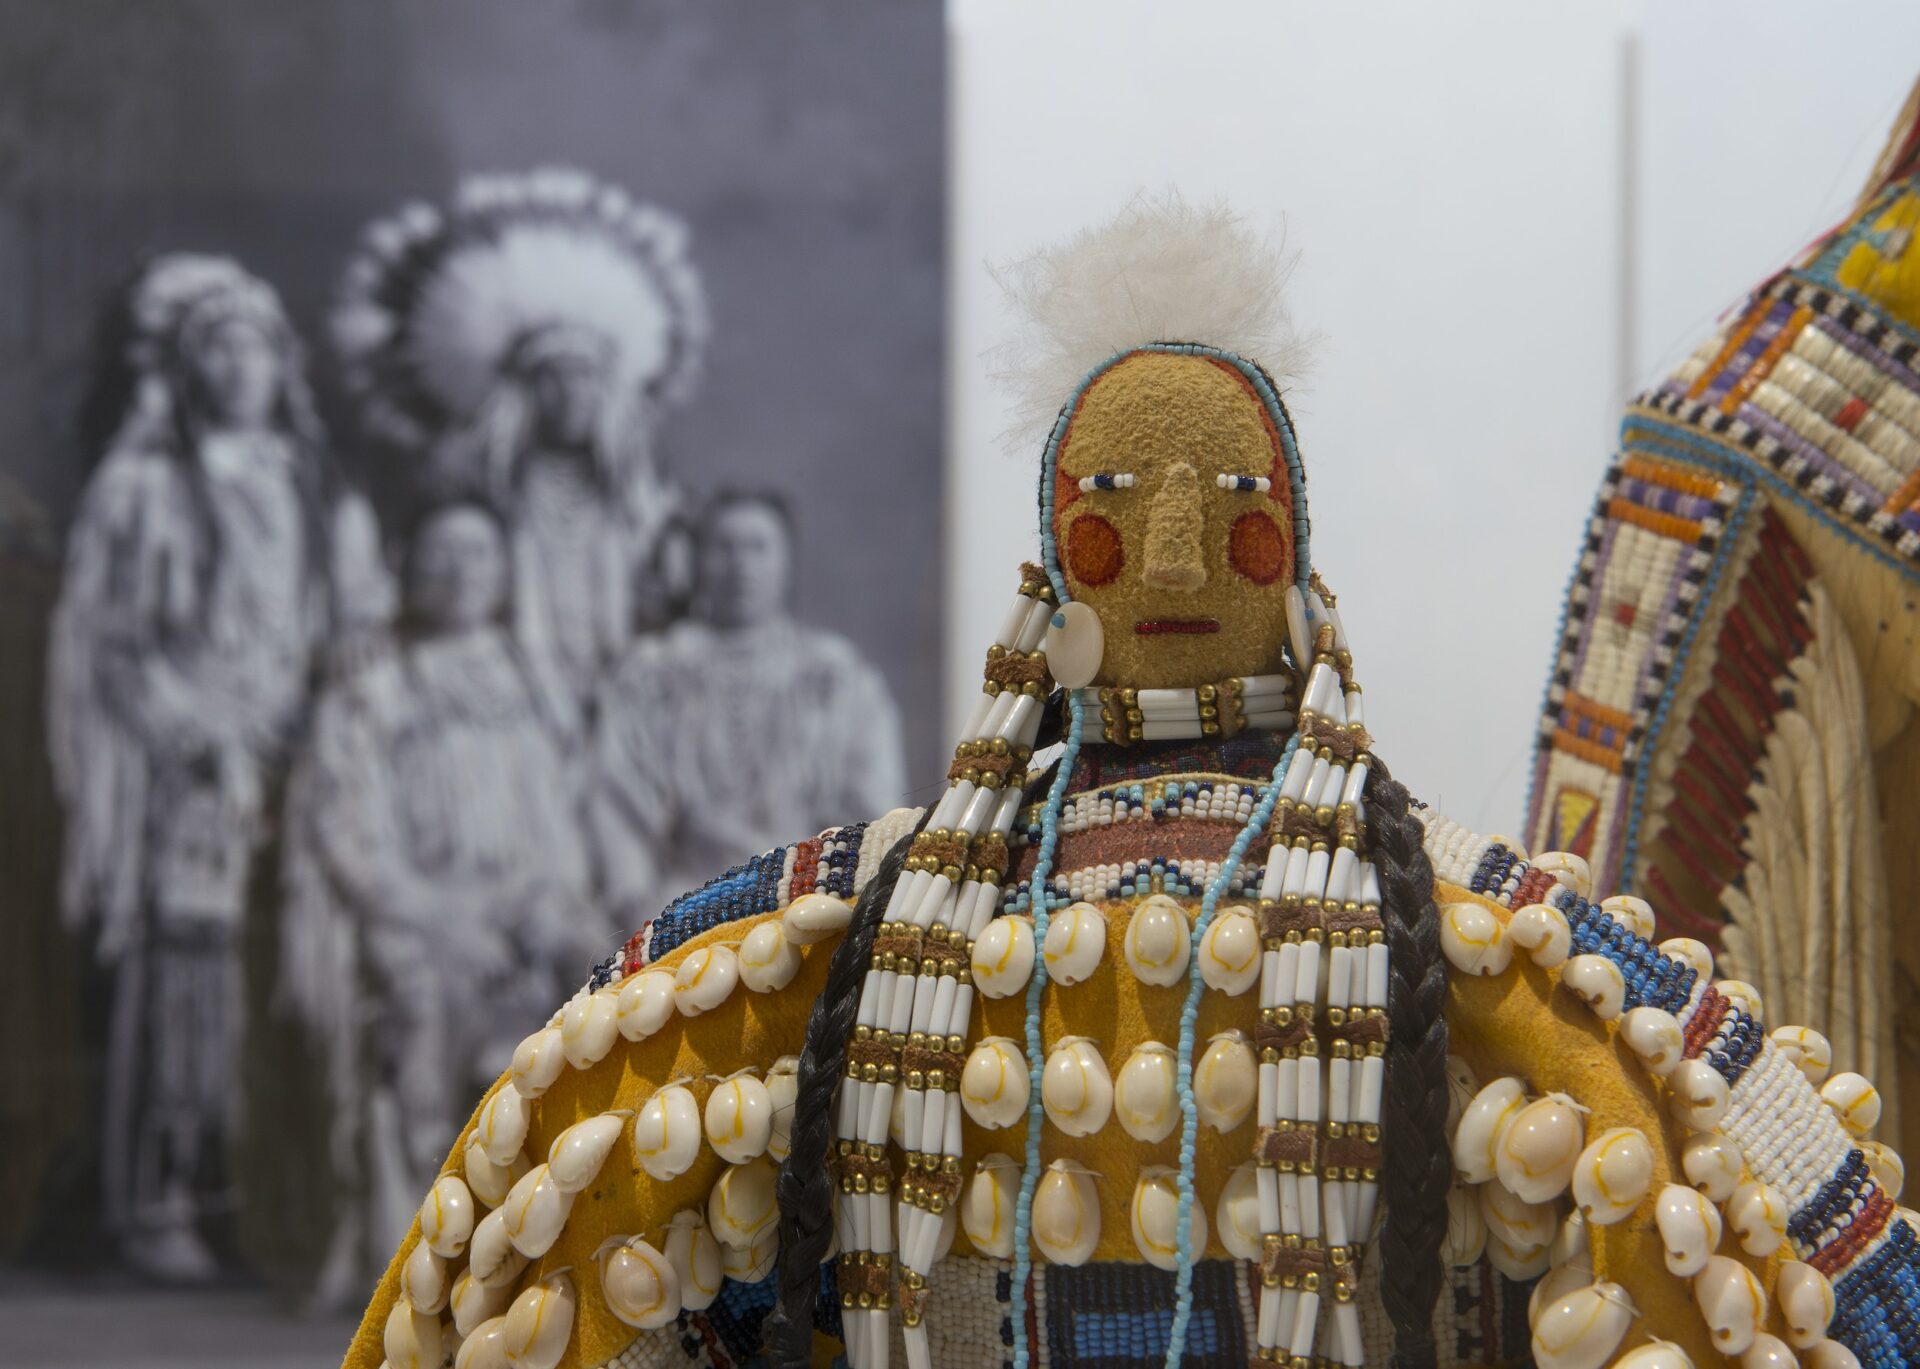 Contemporary Plains Indian Dolls on display in a gallery.